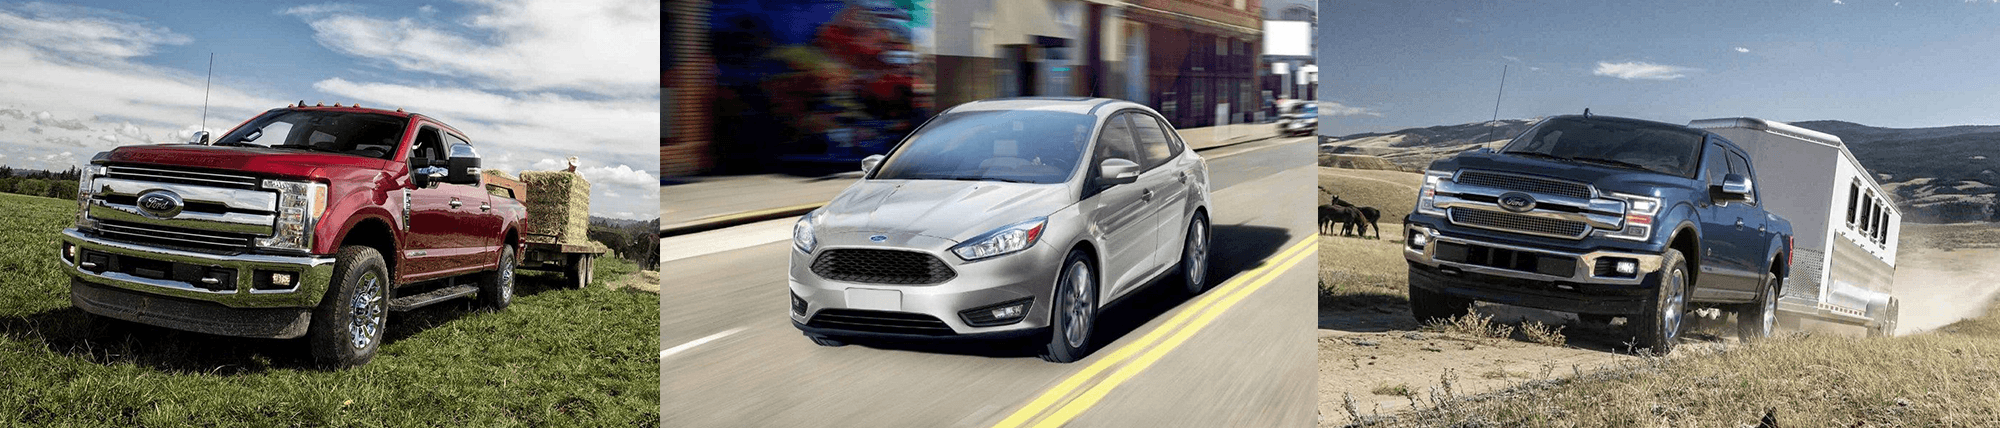 About My Local Pittsburgh Ford Dealership | Moon Township Ford